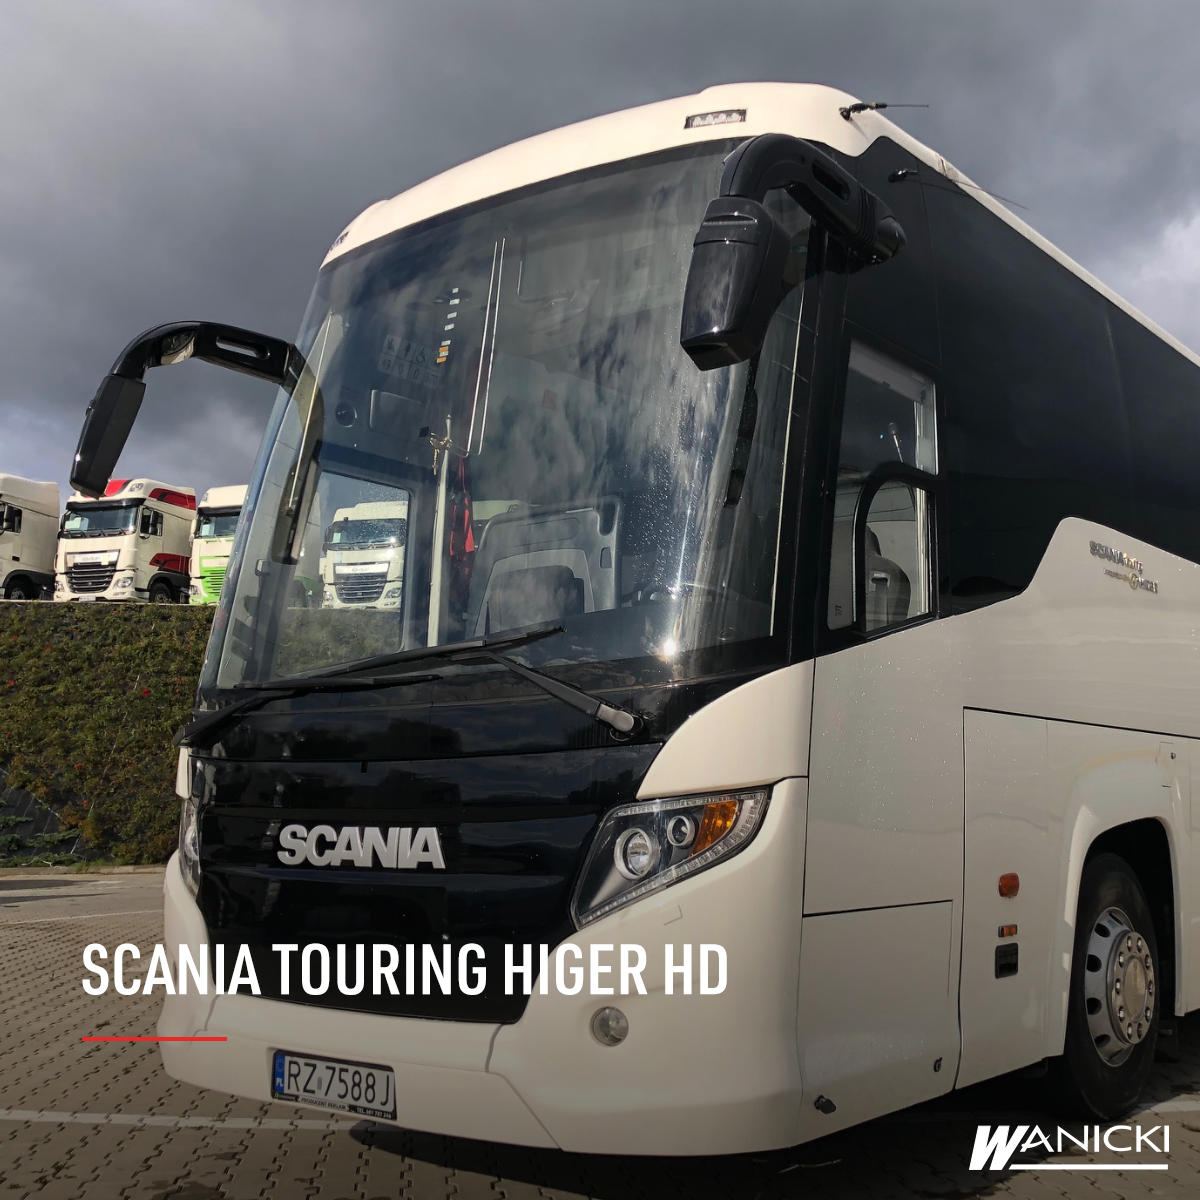 SCANIA TOURING HIGER HD 2012 r.